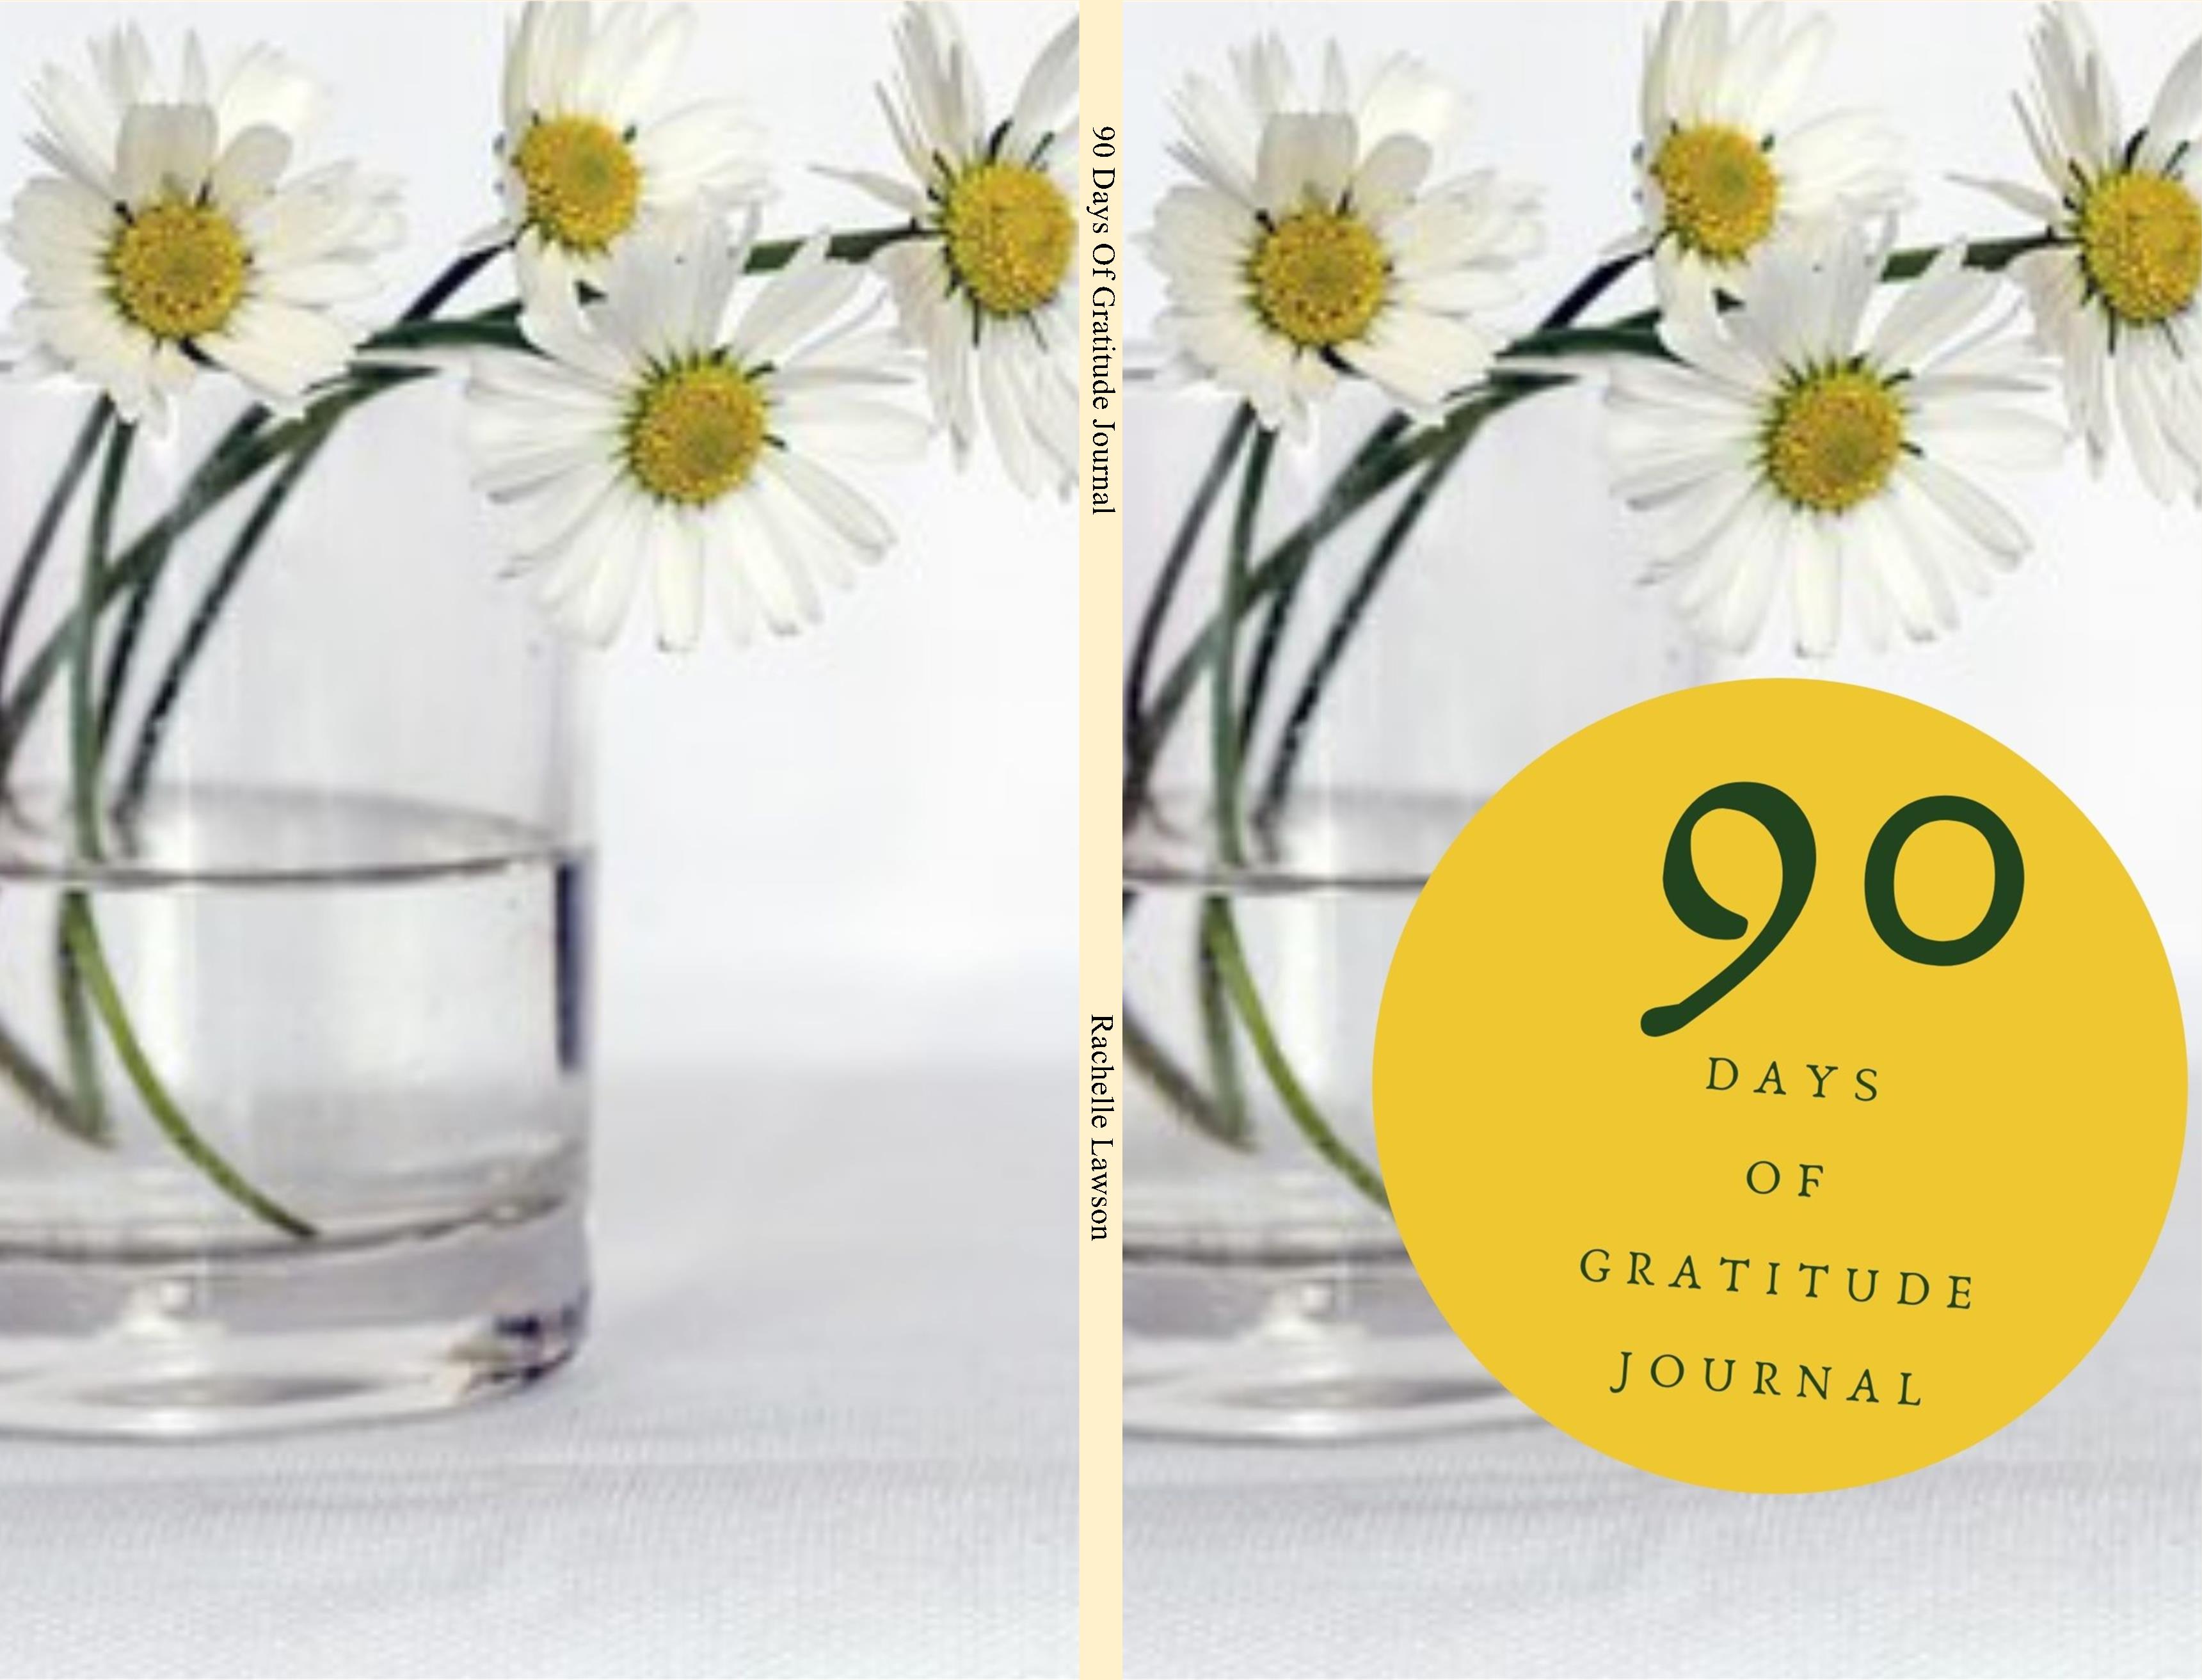 90 Days Of Gratitude Journal cover image